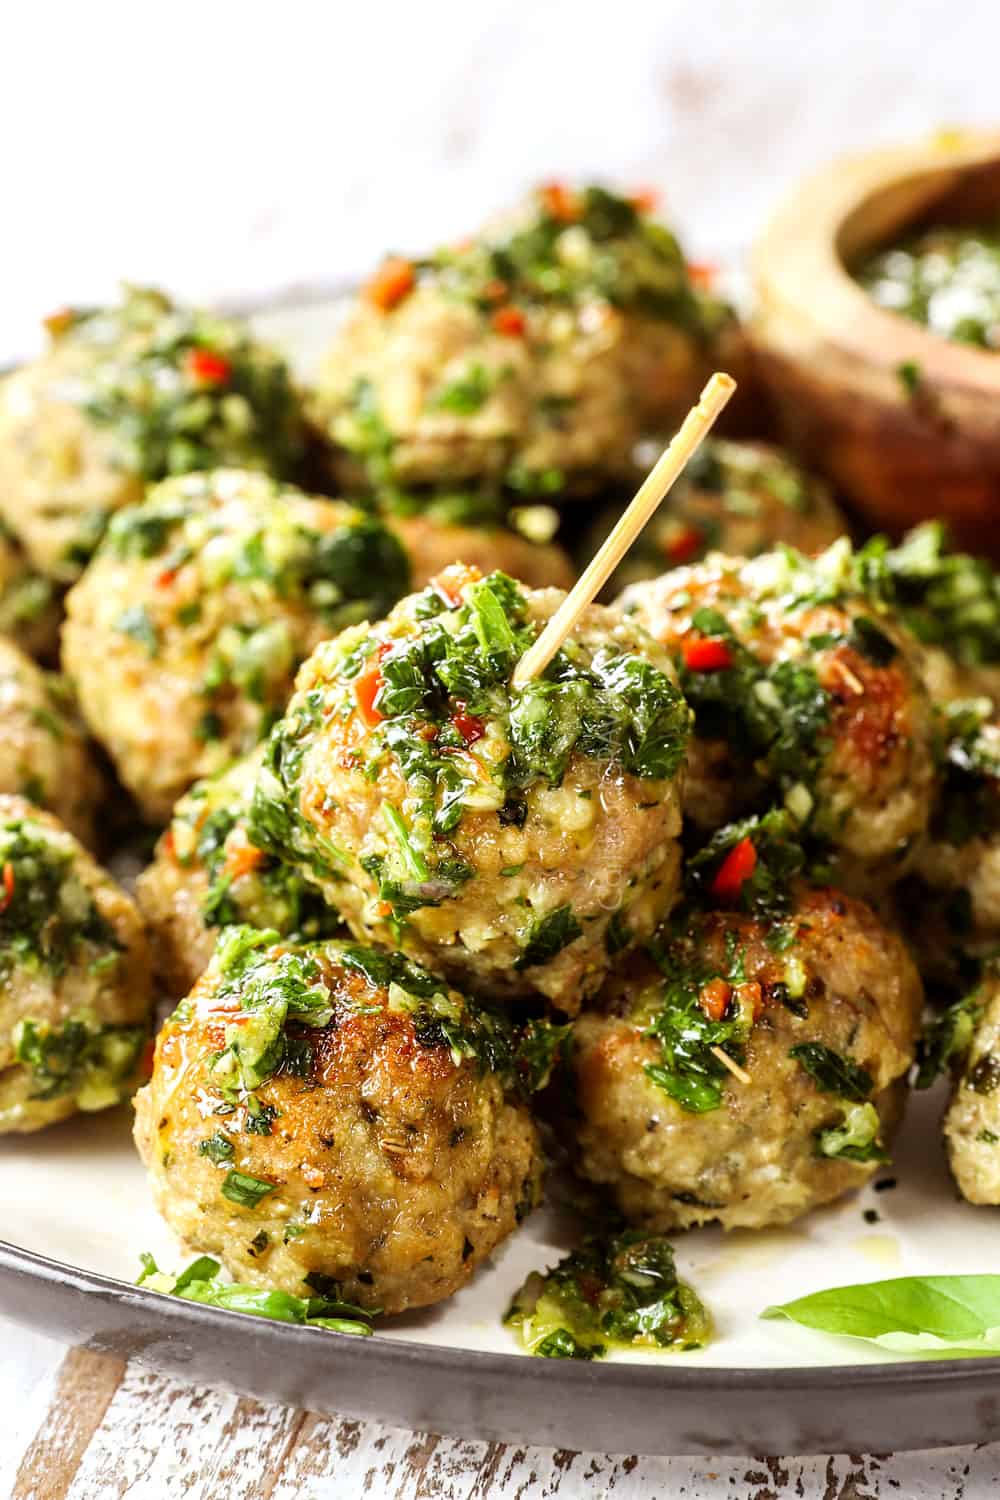 showing how to serve chimichurri recipe by spooning it over meatballs